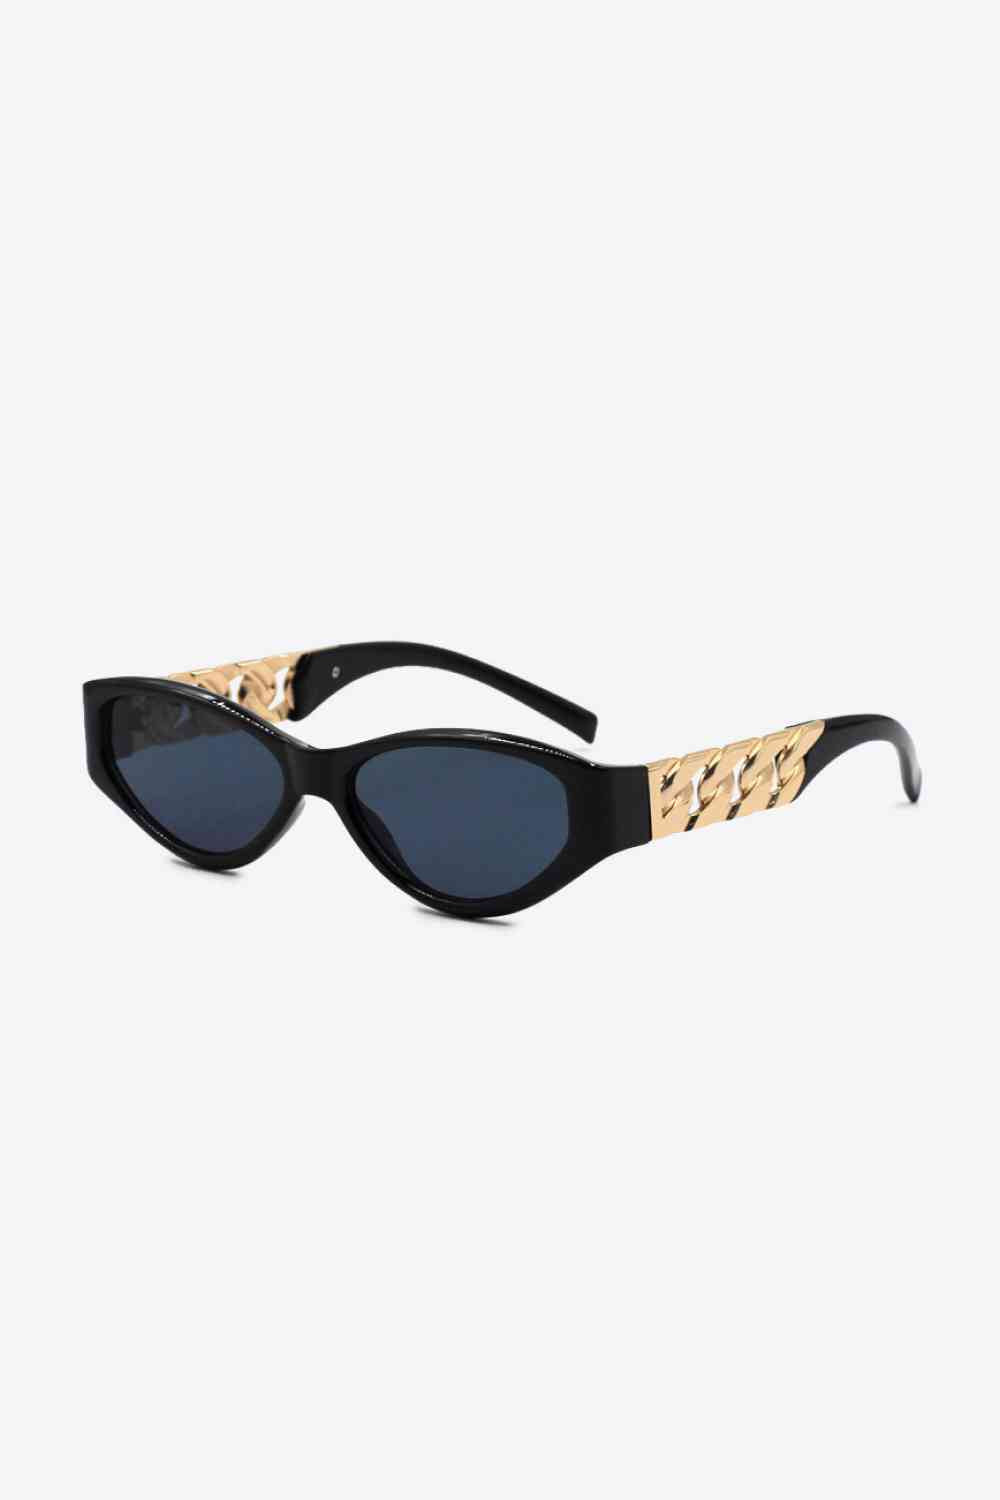 Chain Detail Temple Cat Eye Sunglasses Black One Size